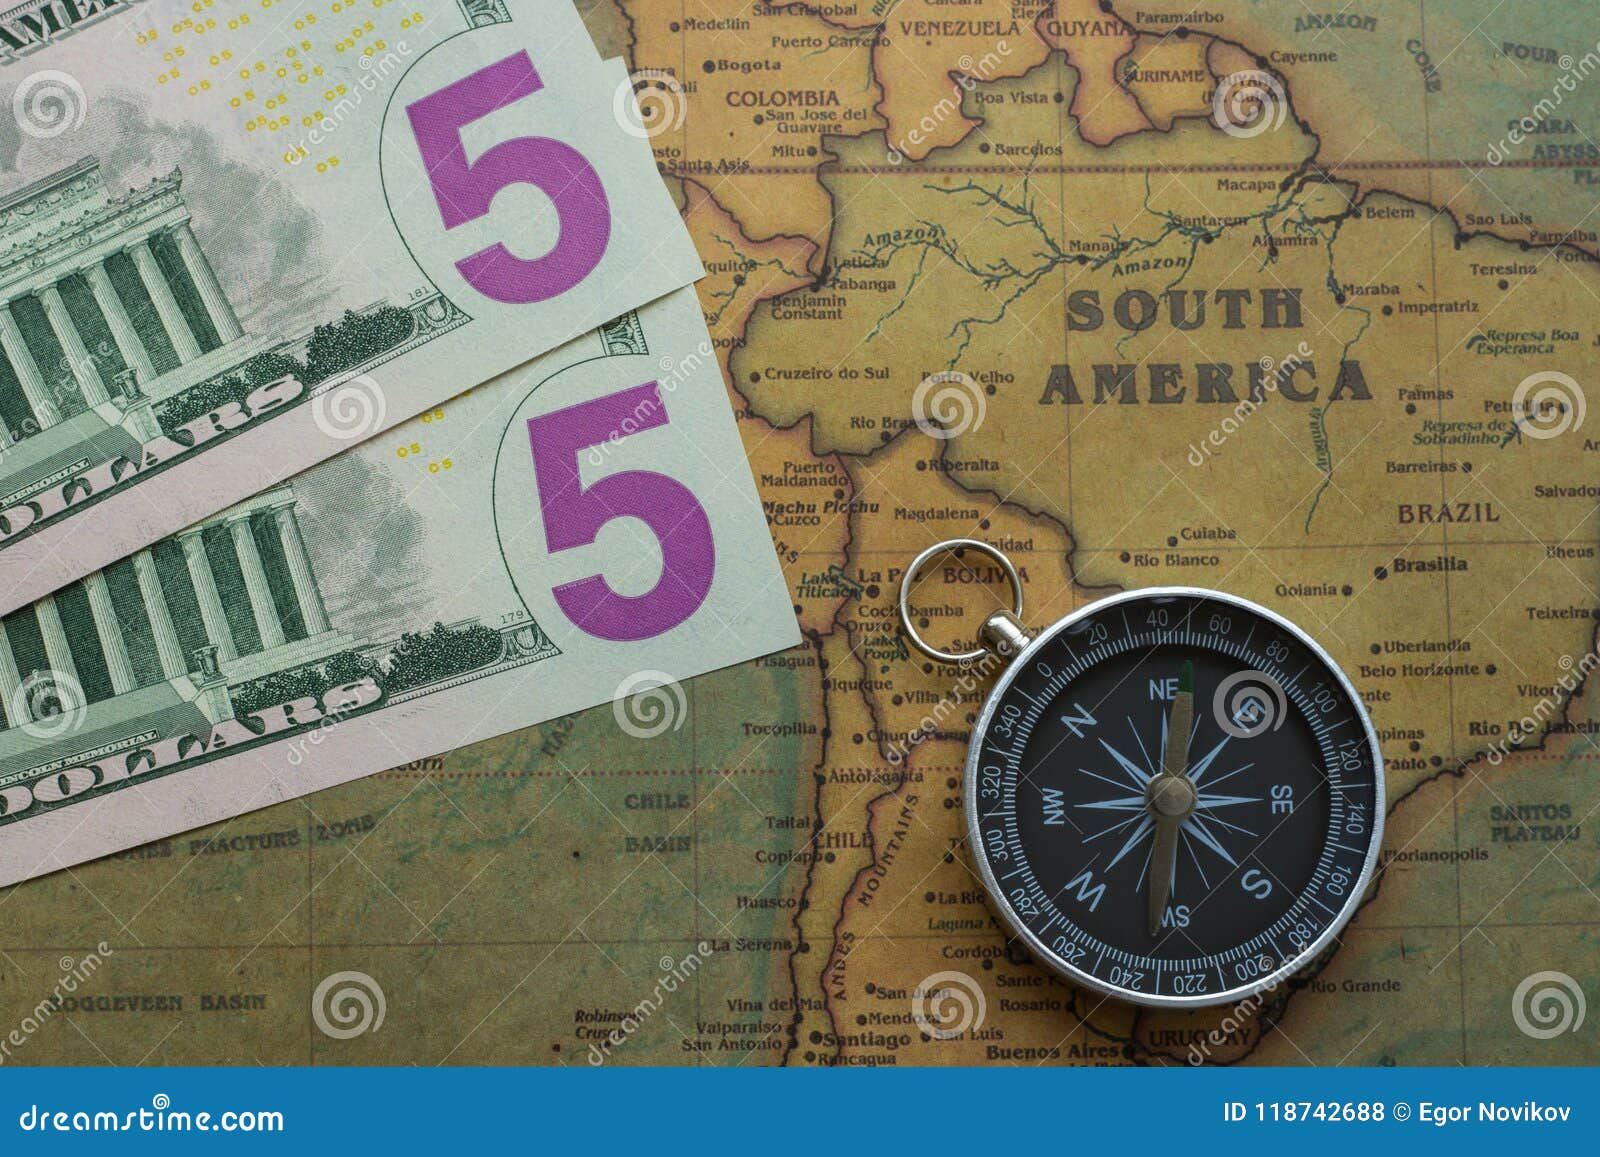 vintage map of south america with five dolor bills and a compass, close-up